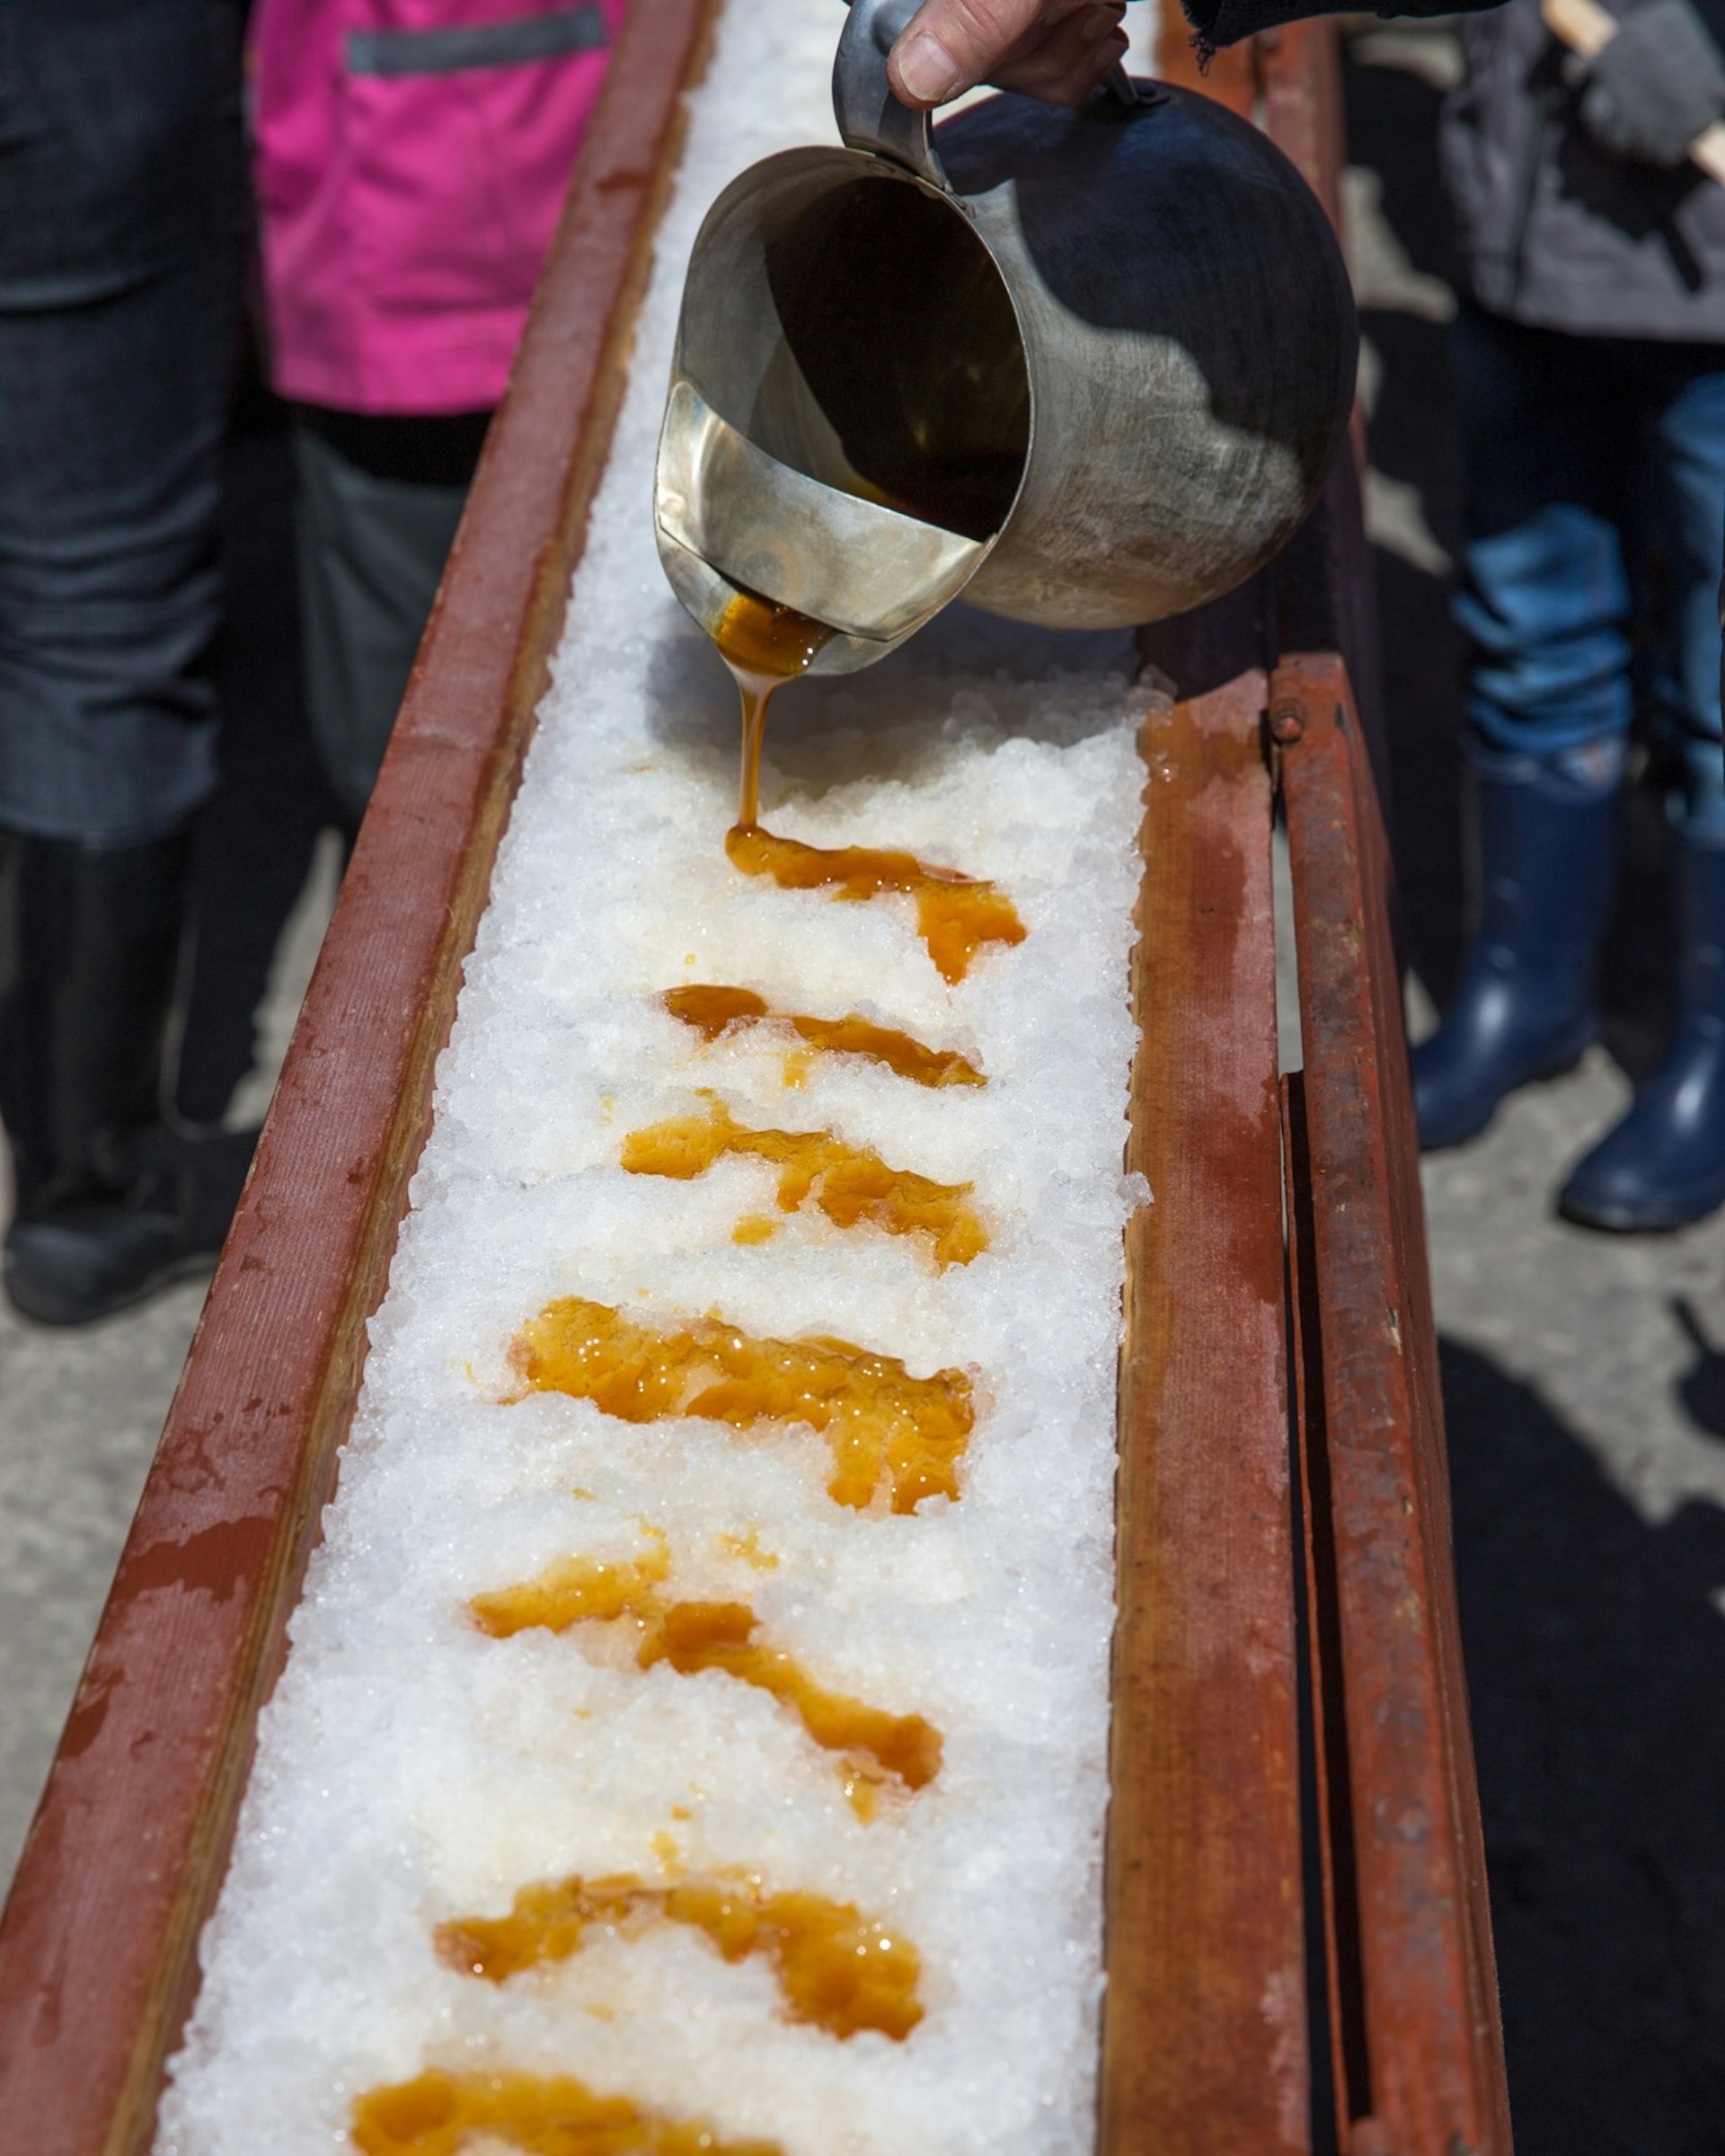 Hot Maple sugar on snow at a sugar shack. A jar of maple sugar is pouring the golden liquid on freshly compacted snow. Best day trips from Montréal